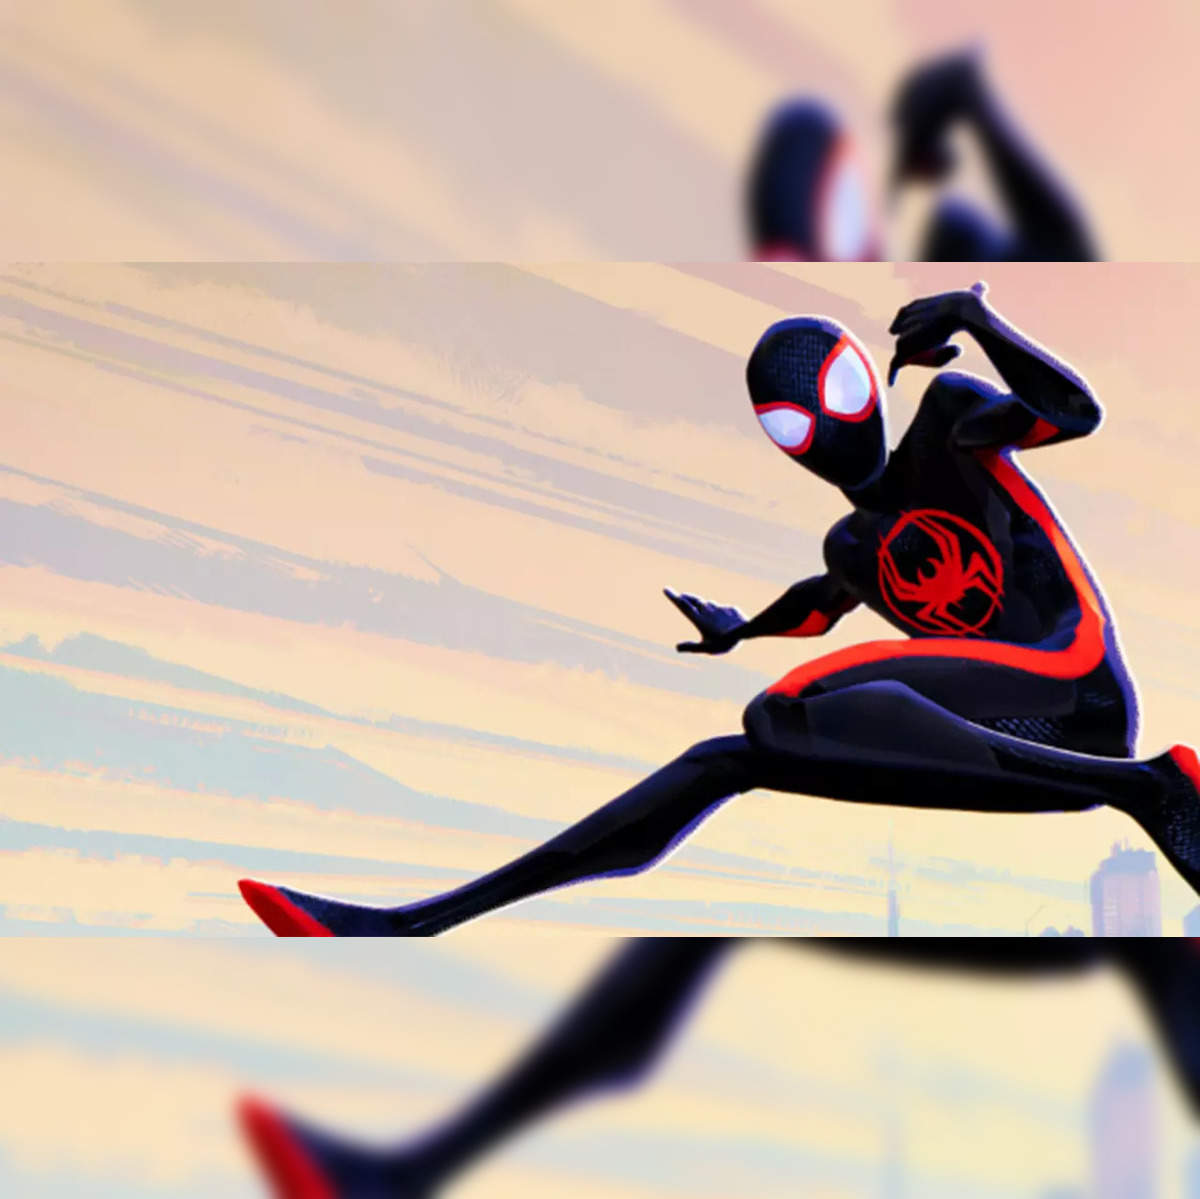 Spider-Man: Across the Spider-Verse' Review: Spectacular Splash Page Sequel  Delivers With Deeper Emotion & Next-Level Comic Book Visuals